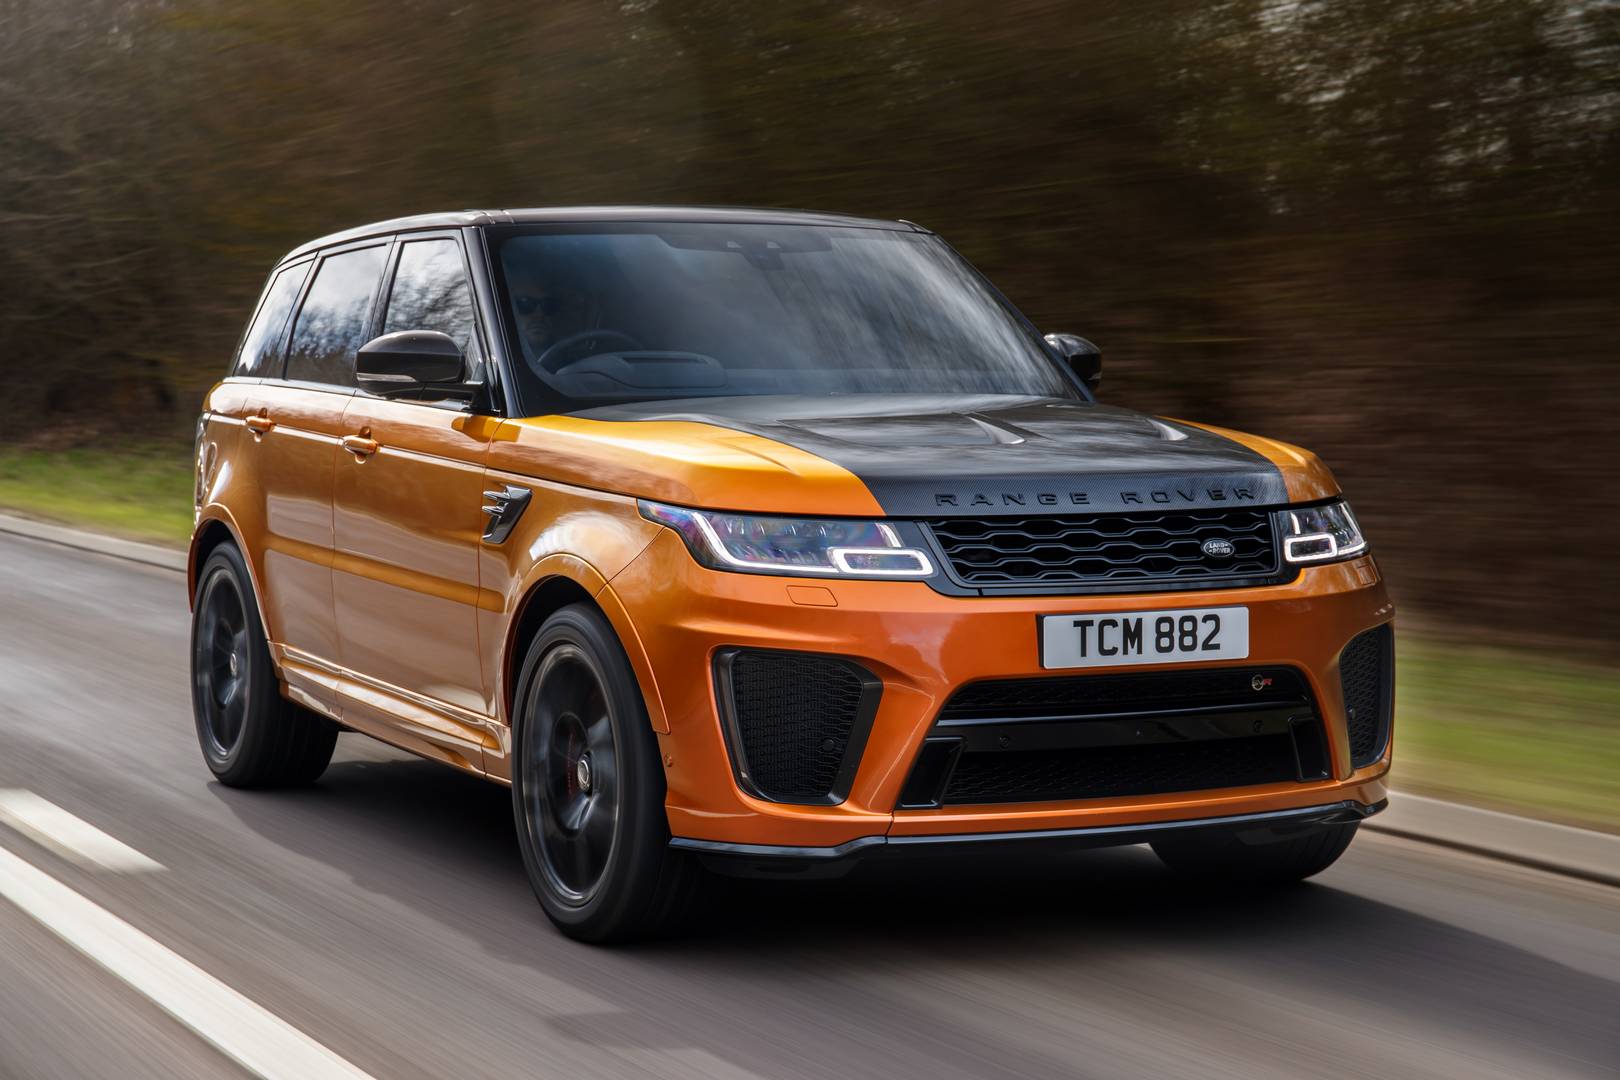 36 HQ Pictures 2021 Range Rover Sport Review : Range Rover Sport D350 (2021) | Reviews, Test Drives ...